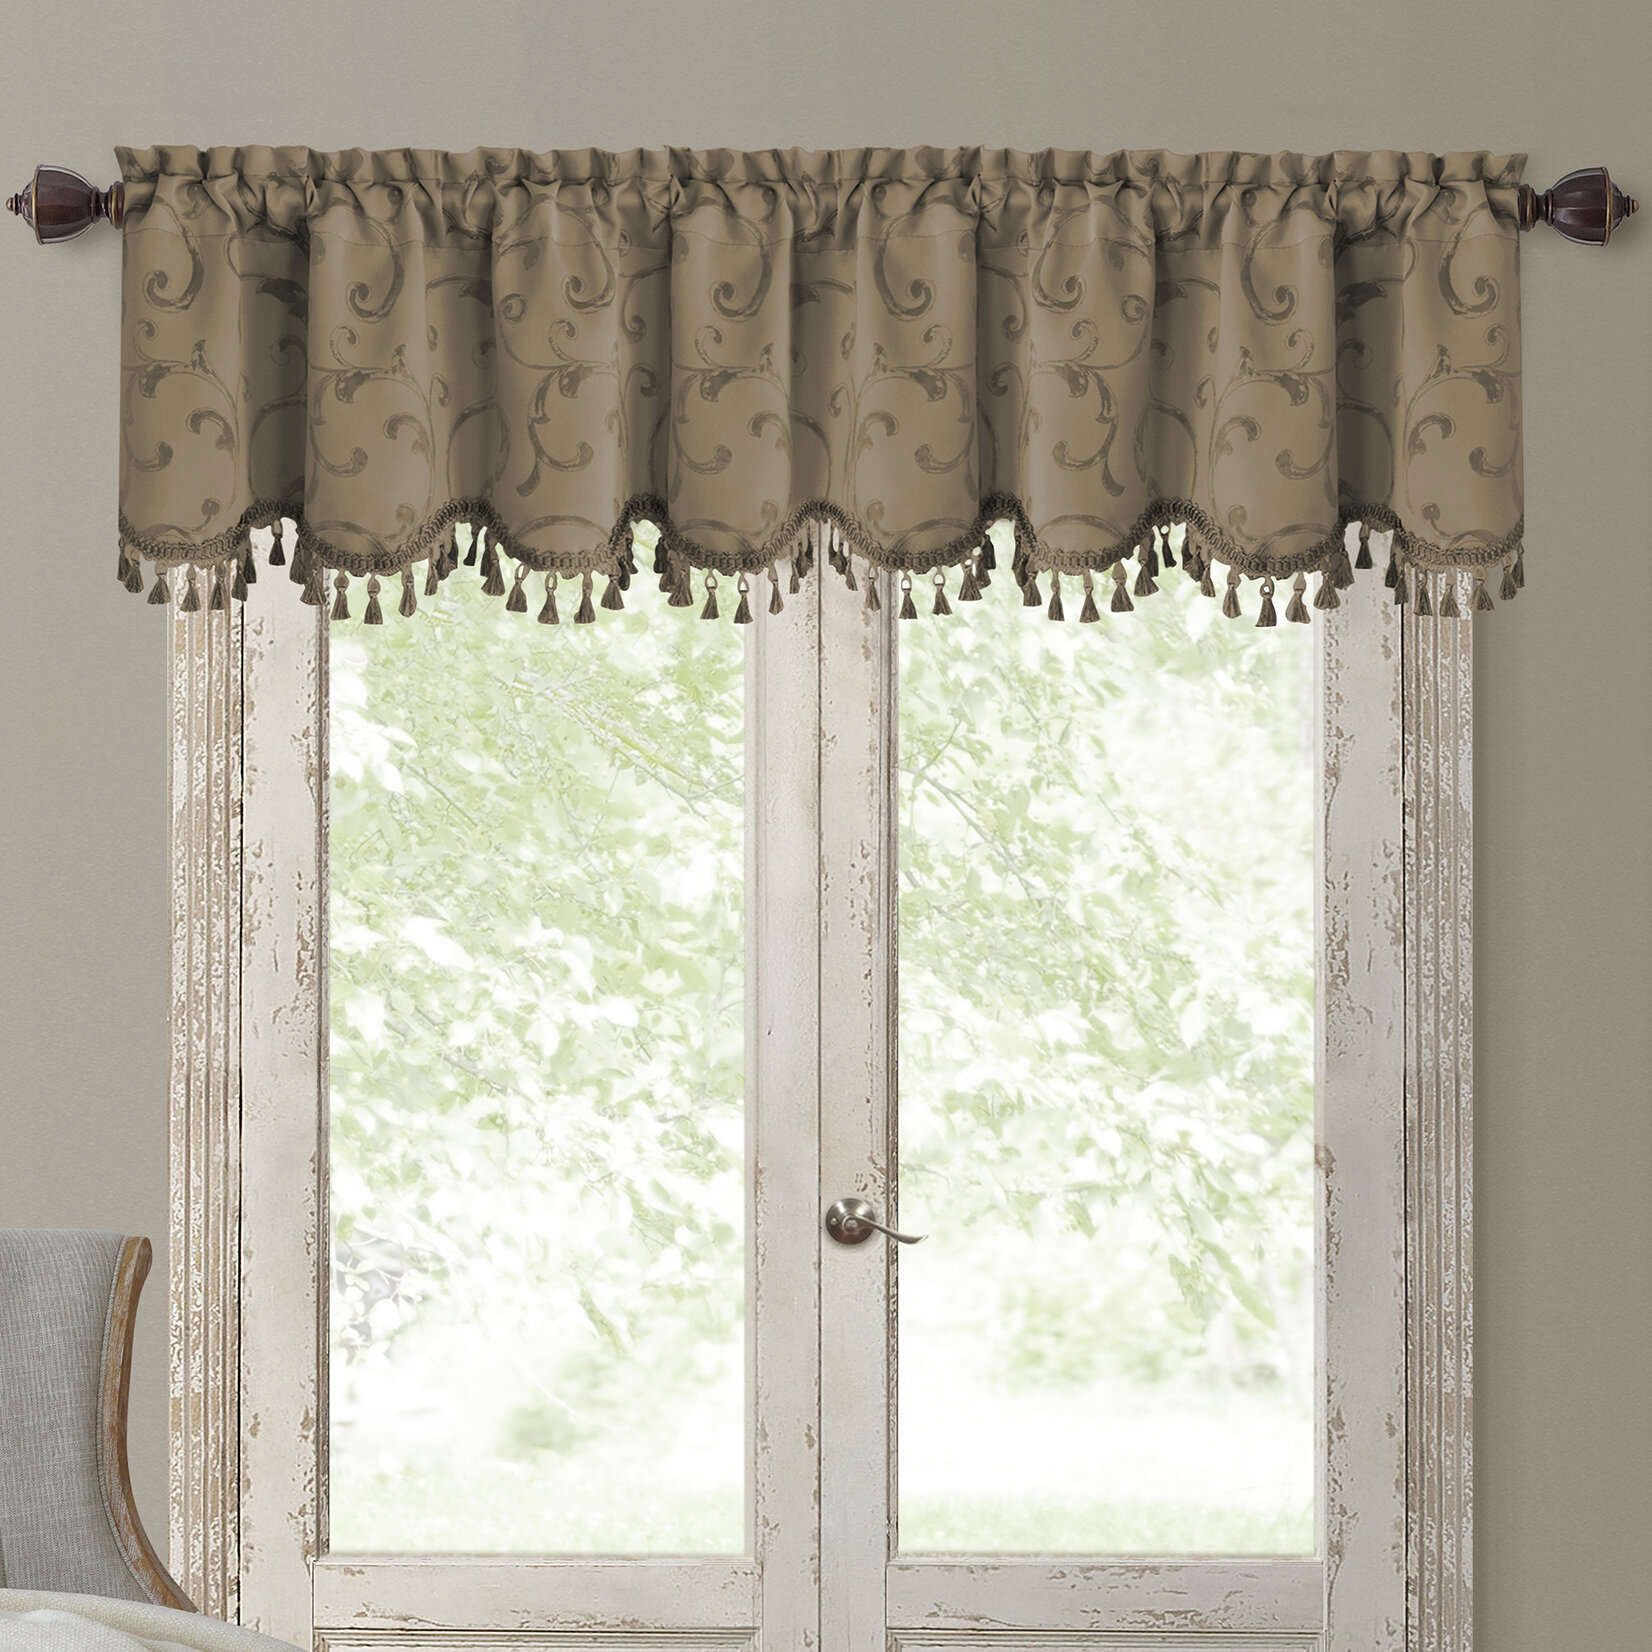 Charming Valance Curtains Interior Enchanting Black And Within Luxurious Kitchen Curtains Tiers, Shade Or Valances (View 8 of 20)